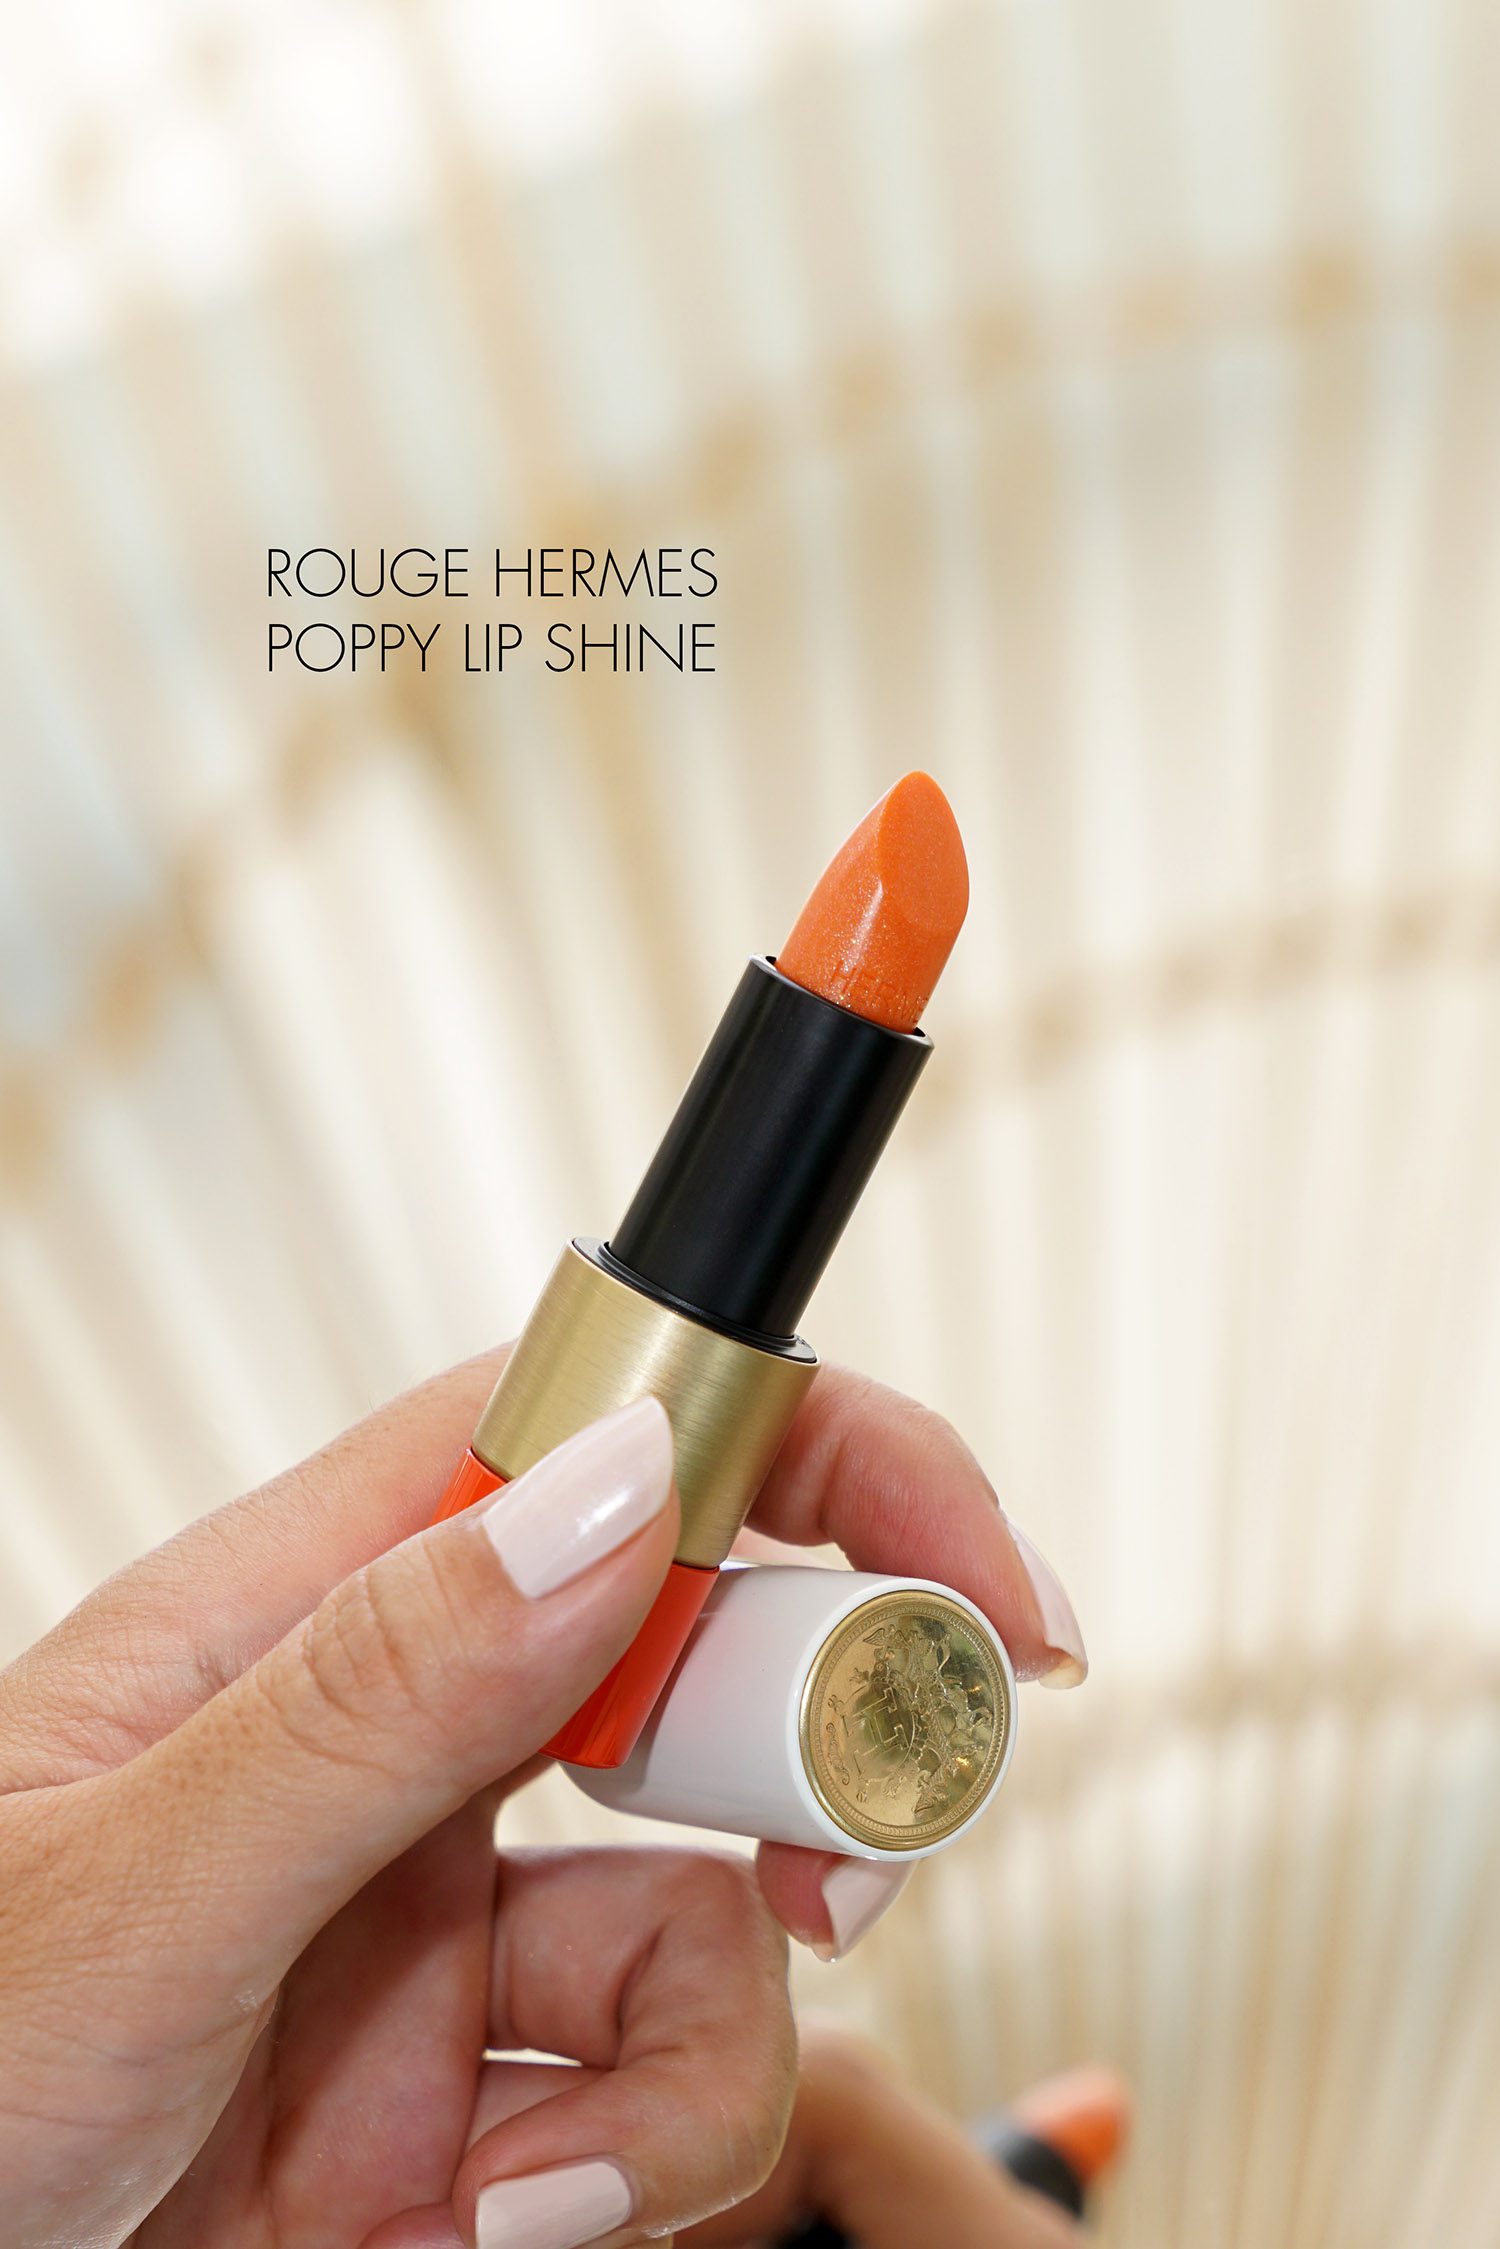 Hermes Rose Epice, Rose, Rouge e Satin Lipsticks Review, Live  Swatches, Makeup Looks - Beauty Trends and Latest Makeup Collections